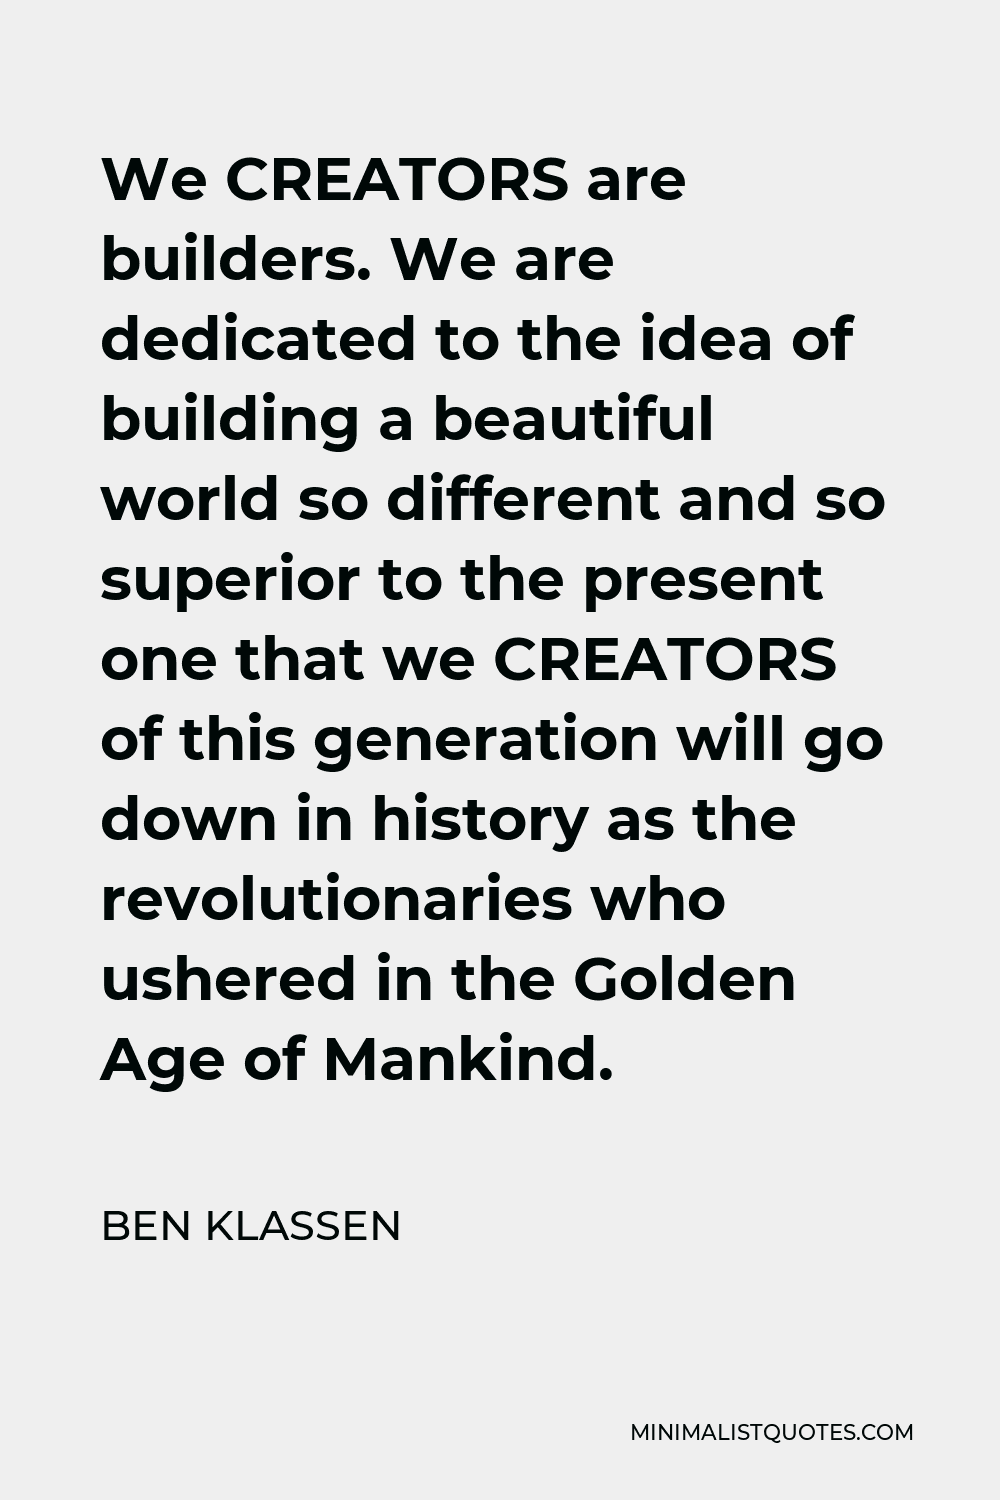 Ben Klassen Quote - We CREATORS are builders. We are dedicated to the idea of building a beautiful world so different and so superior to the present one that we CREATORS of this generation will go down in history as the revolutionaries who ushered in the Golden Age of Mankind.